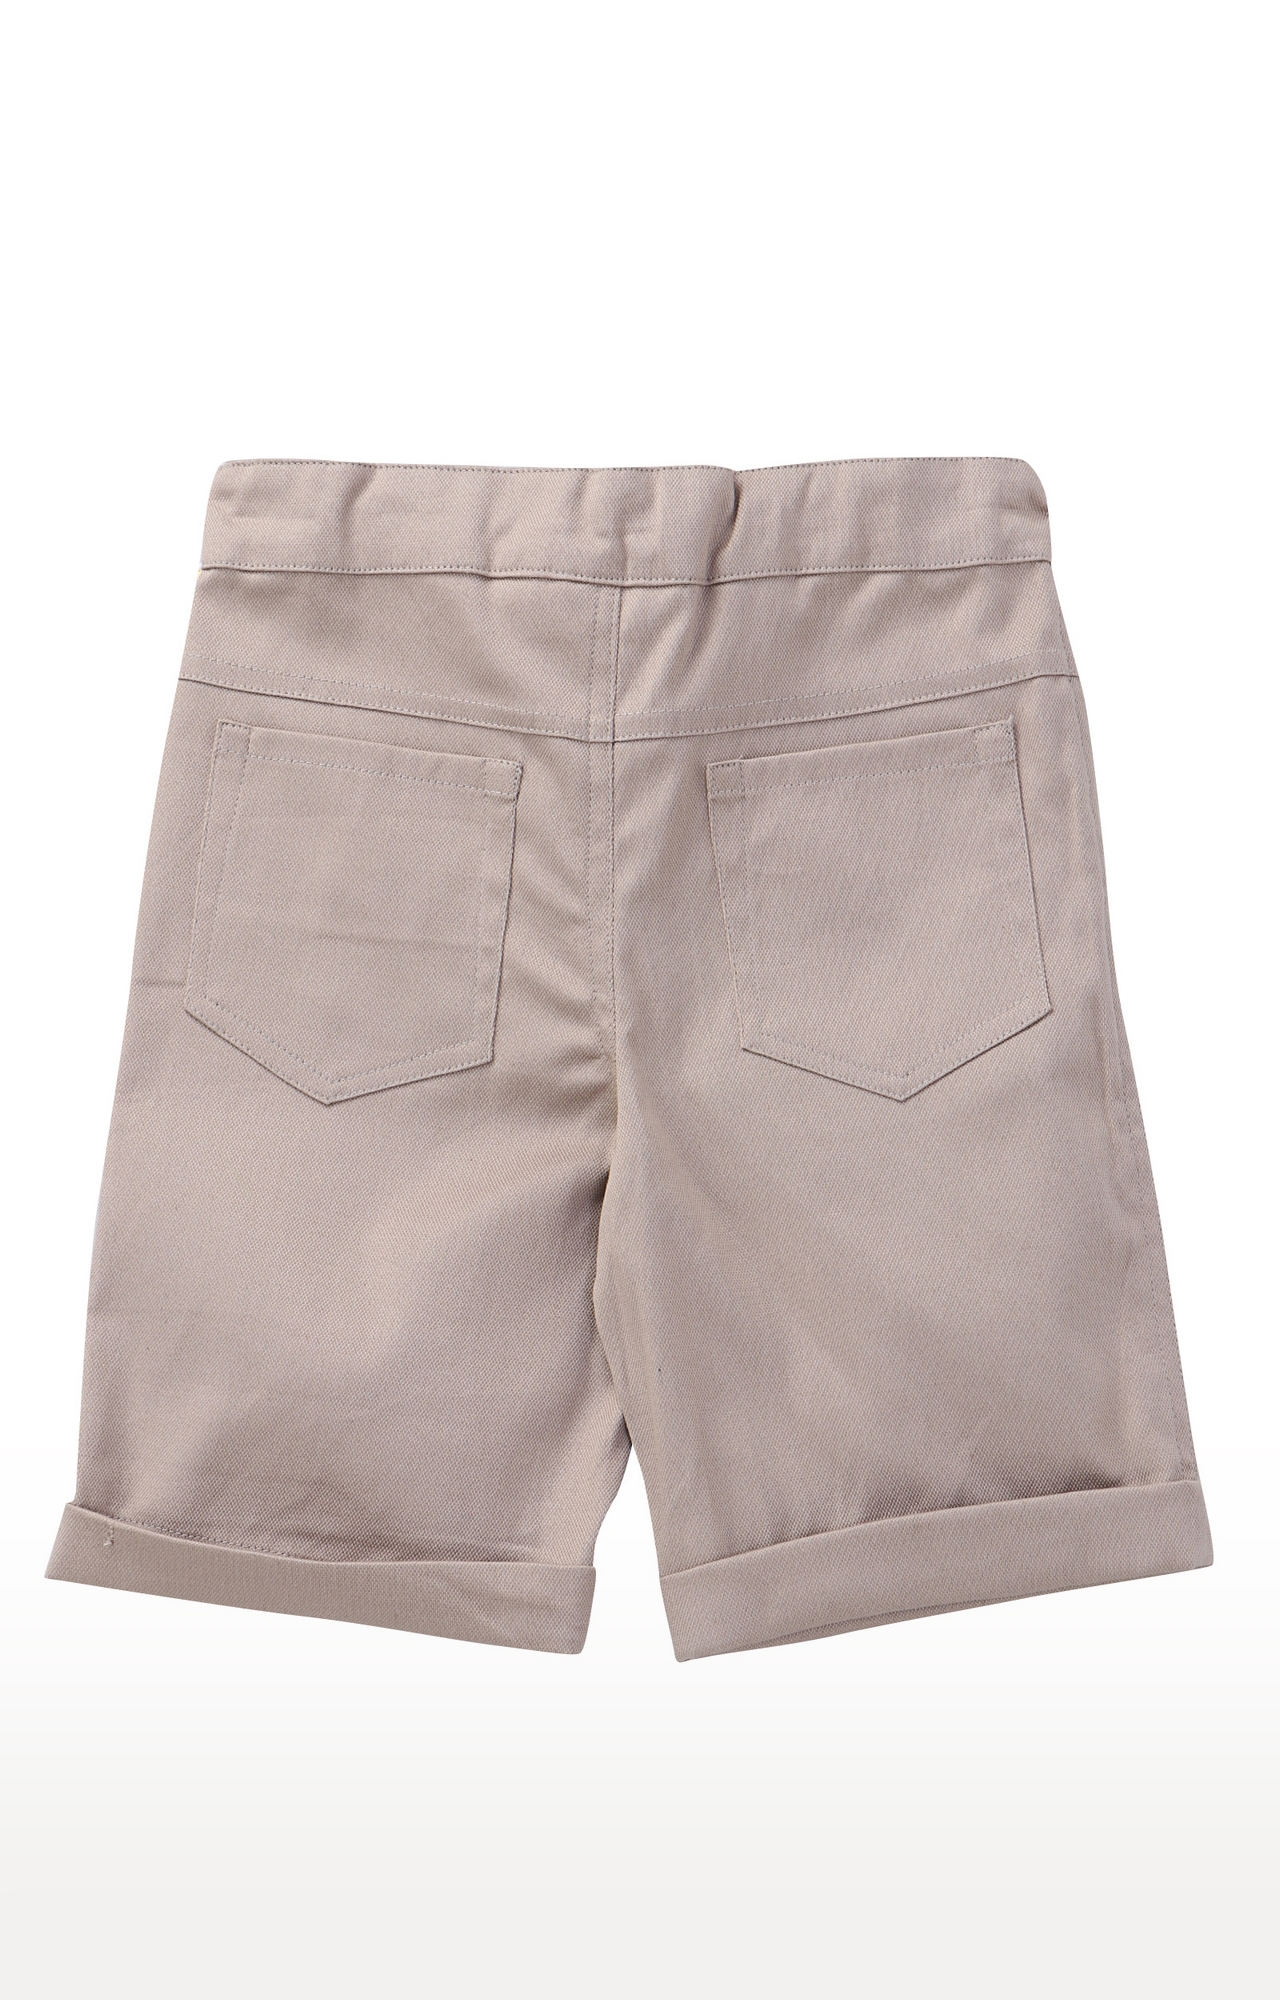 Popsicles Clothing | Popsicles Flaxen Shorts Regular Fit For Boys 1